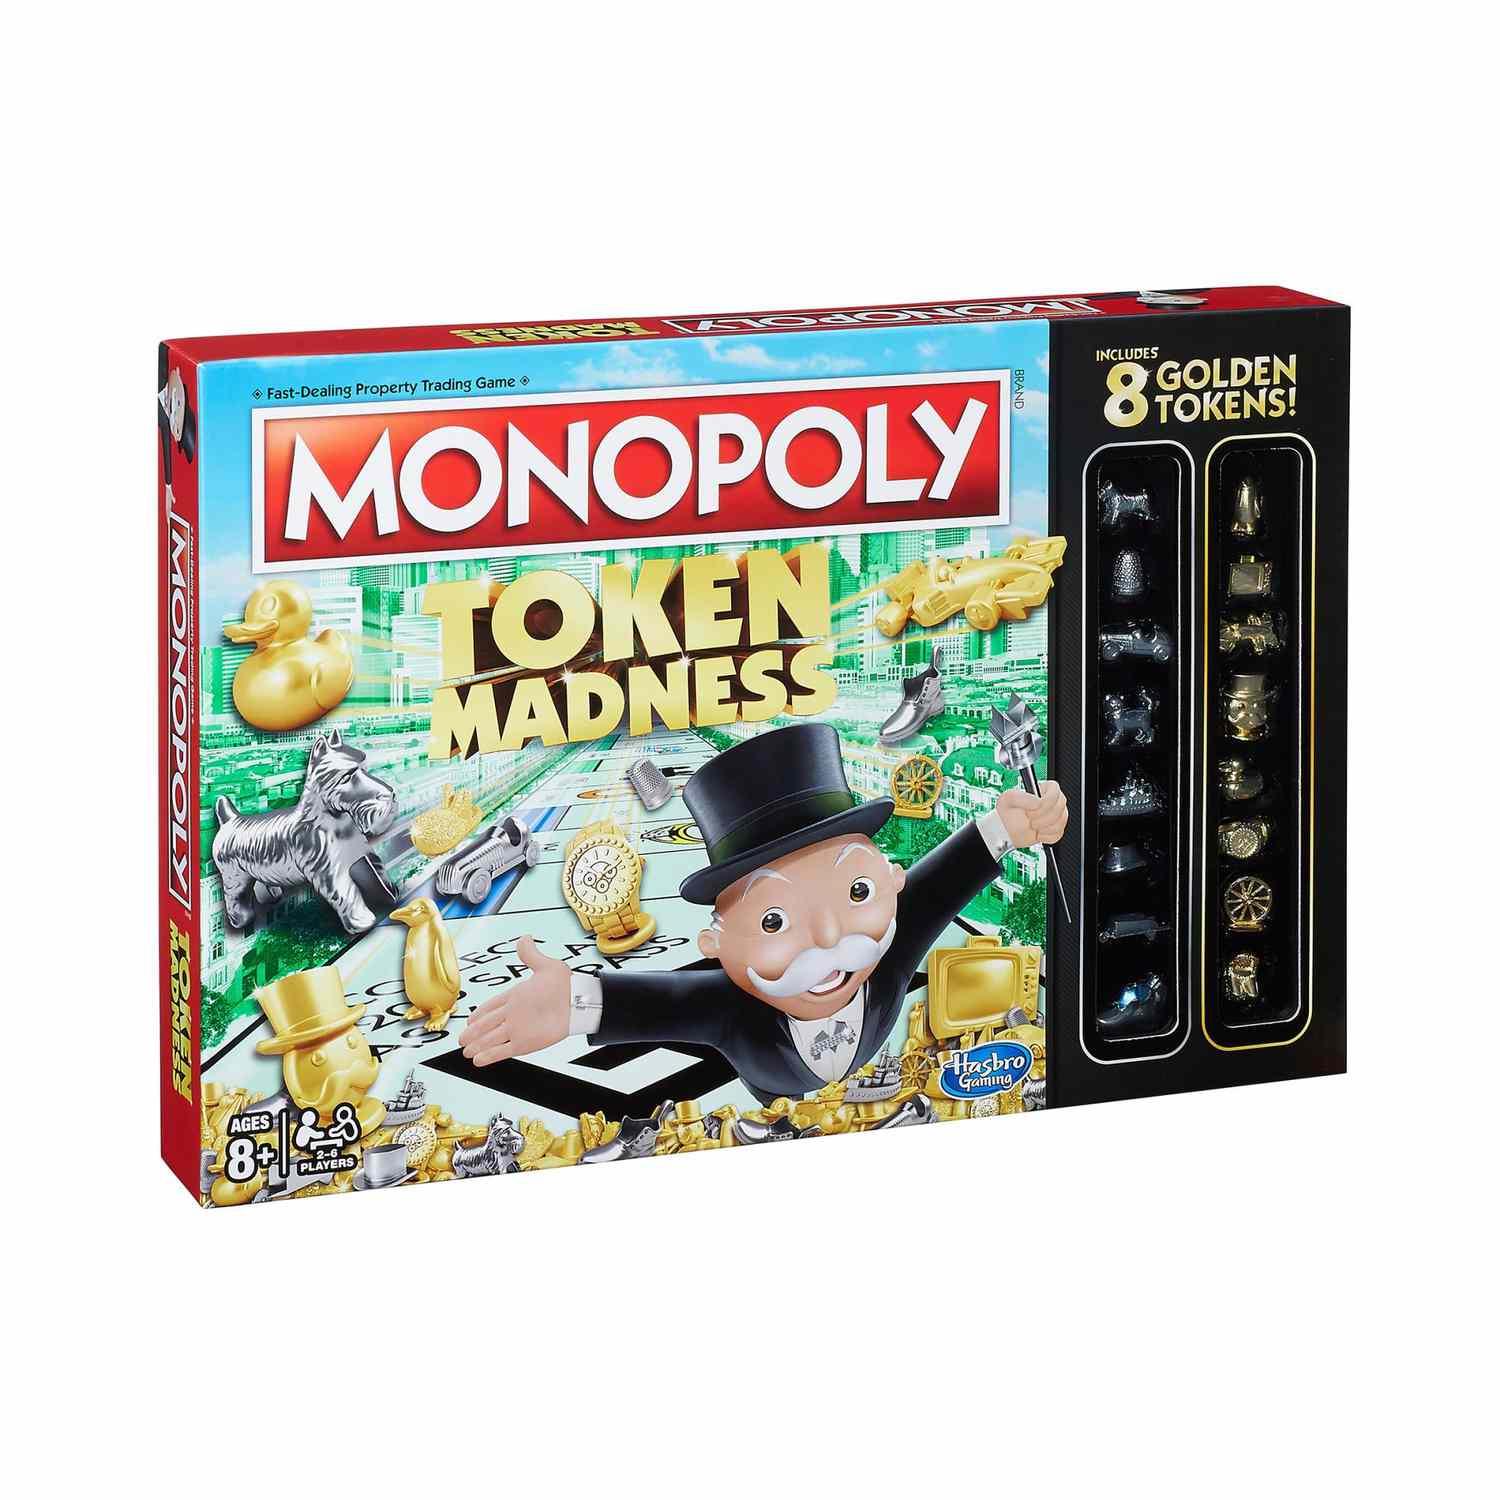 monopoly-token-madness-16-pack-game